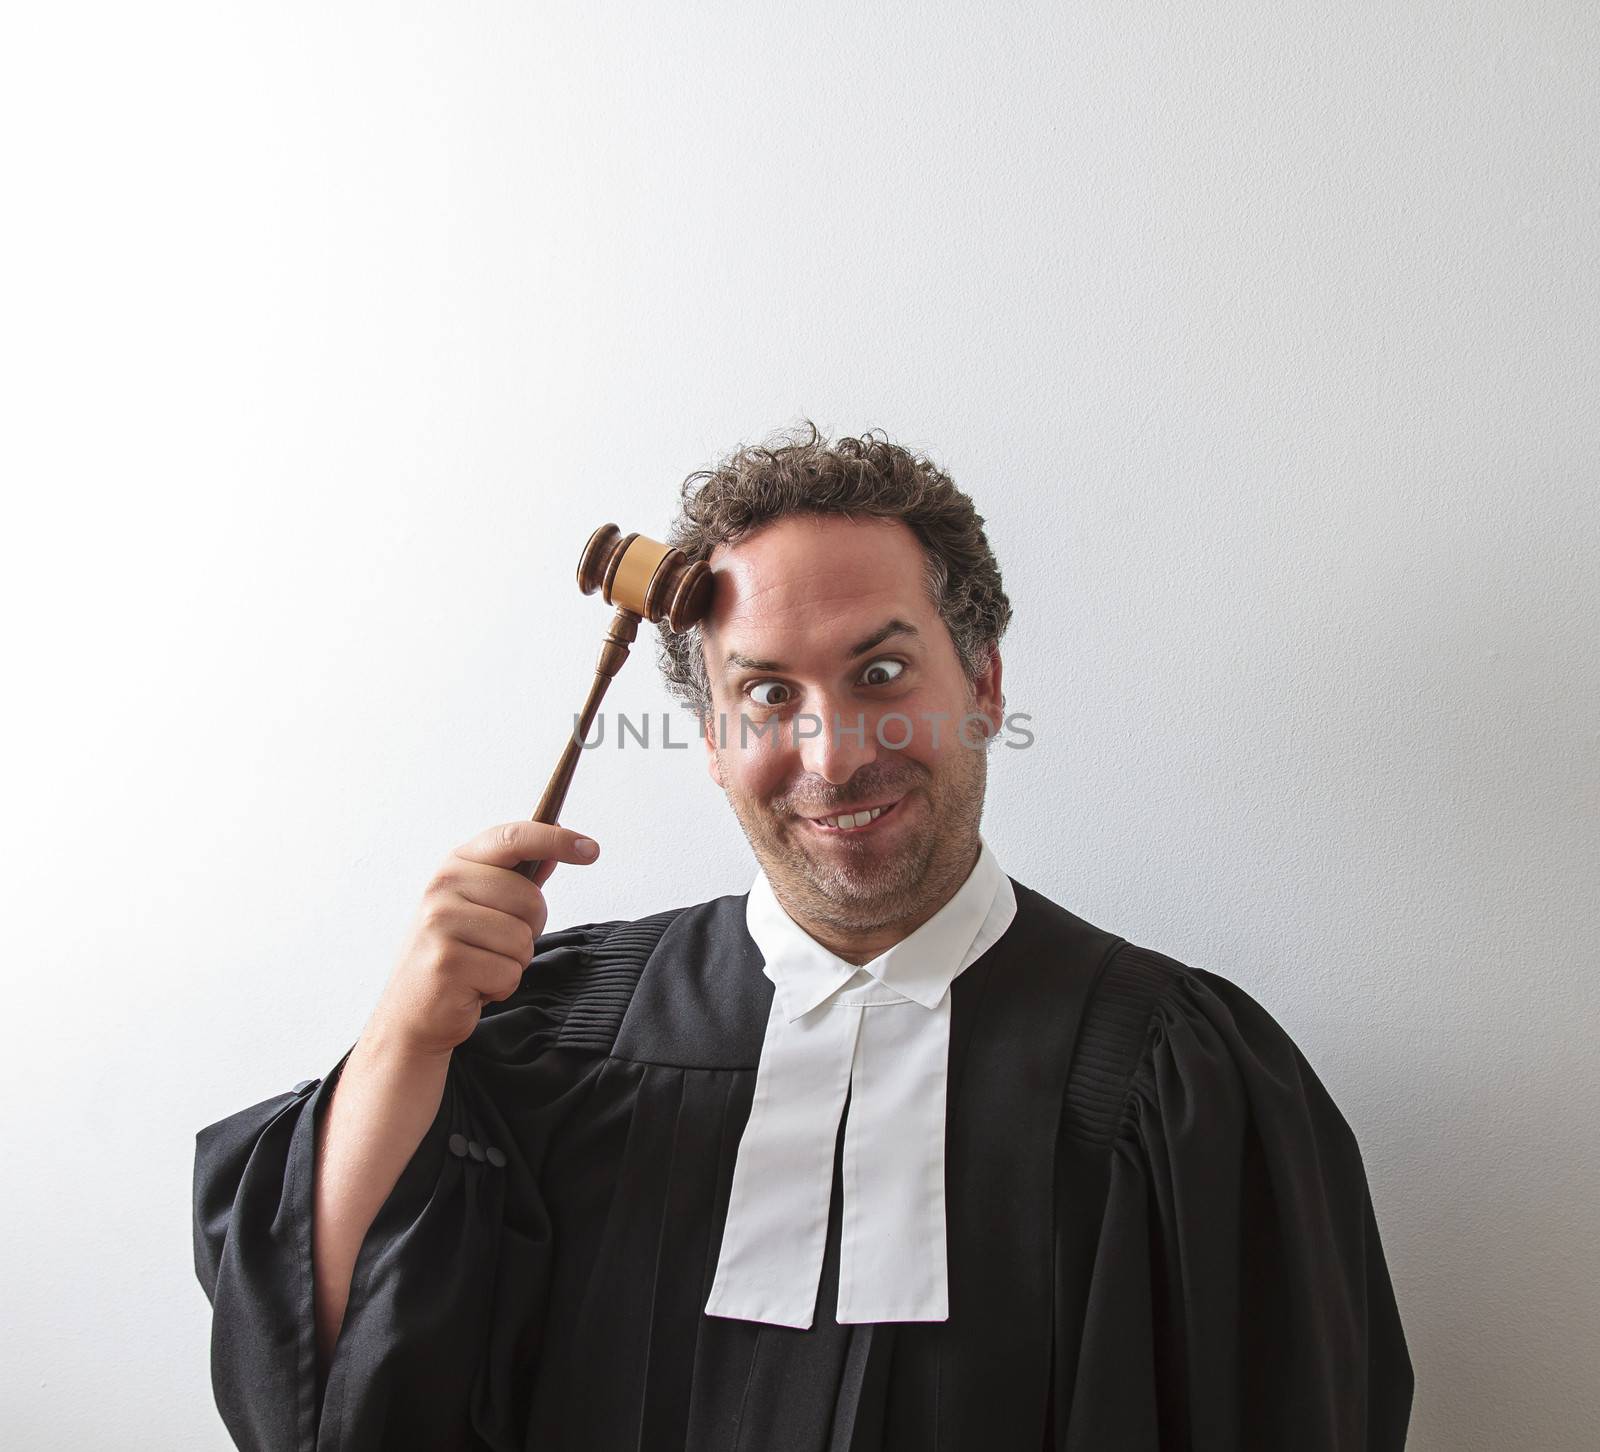 canadian attorney clowning around and banging the gavel on his head